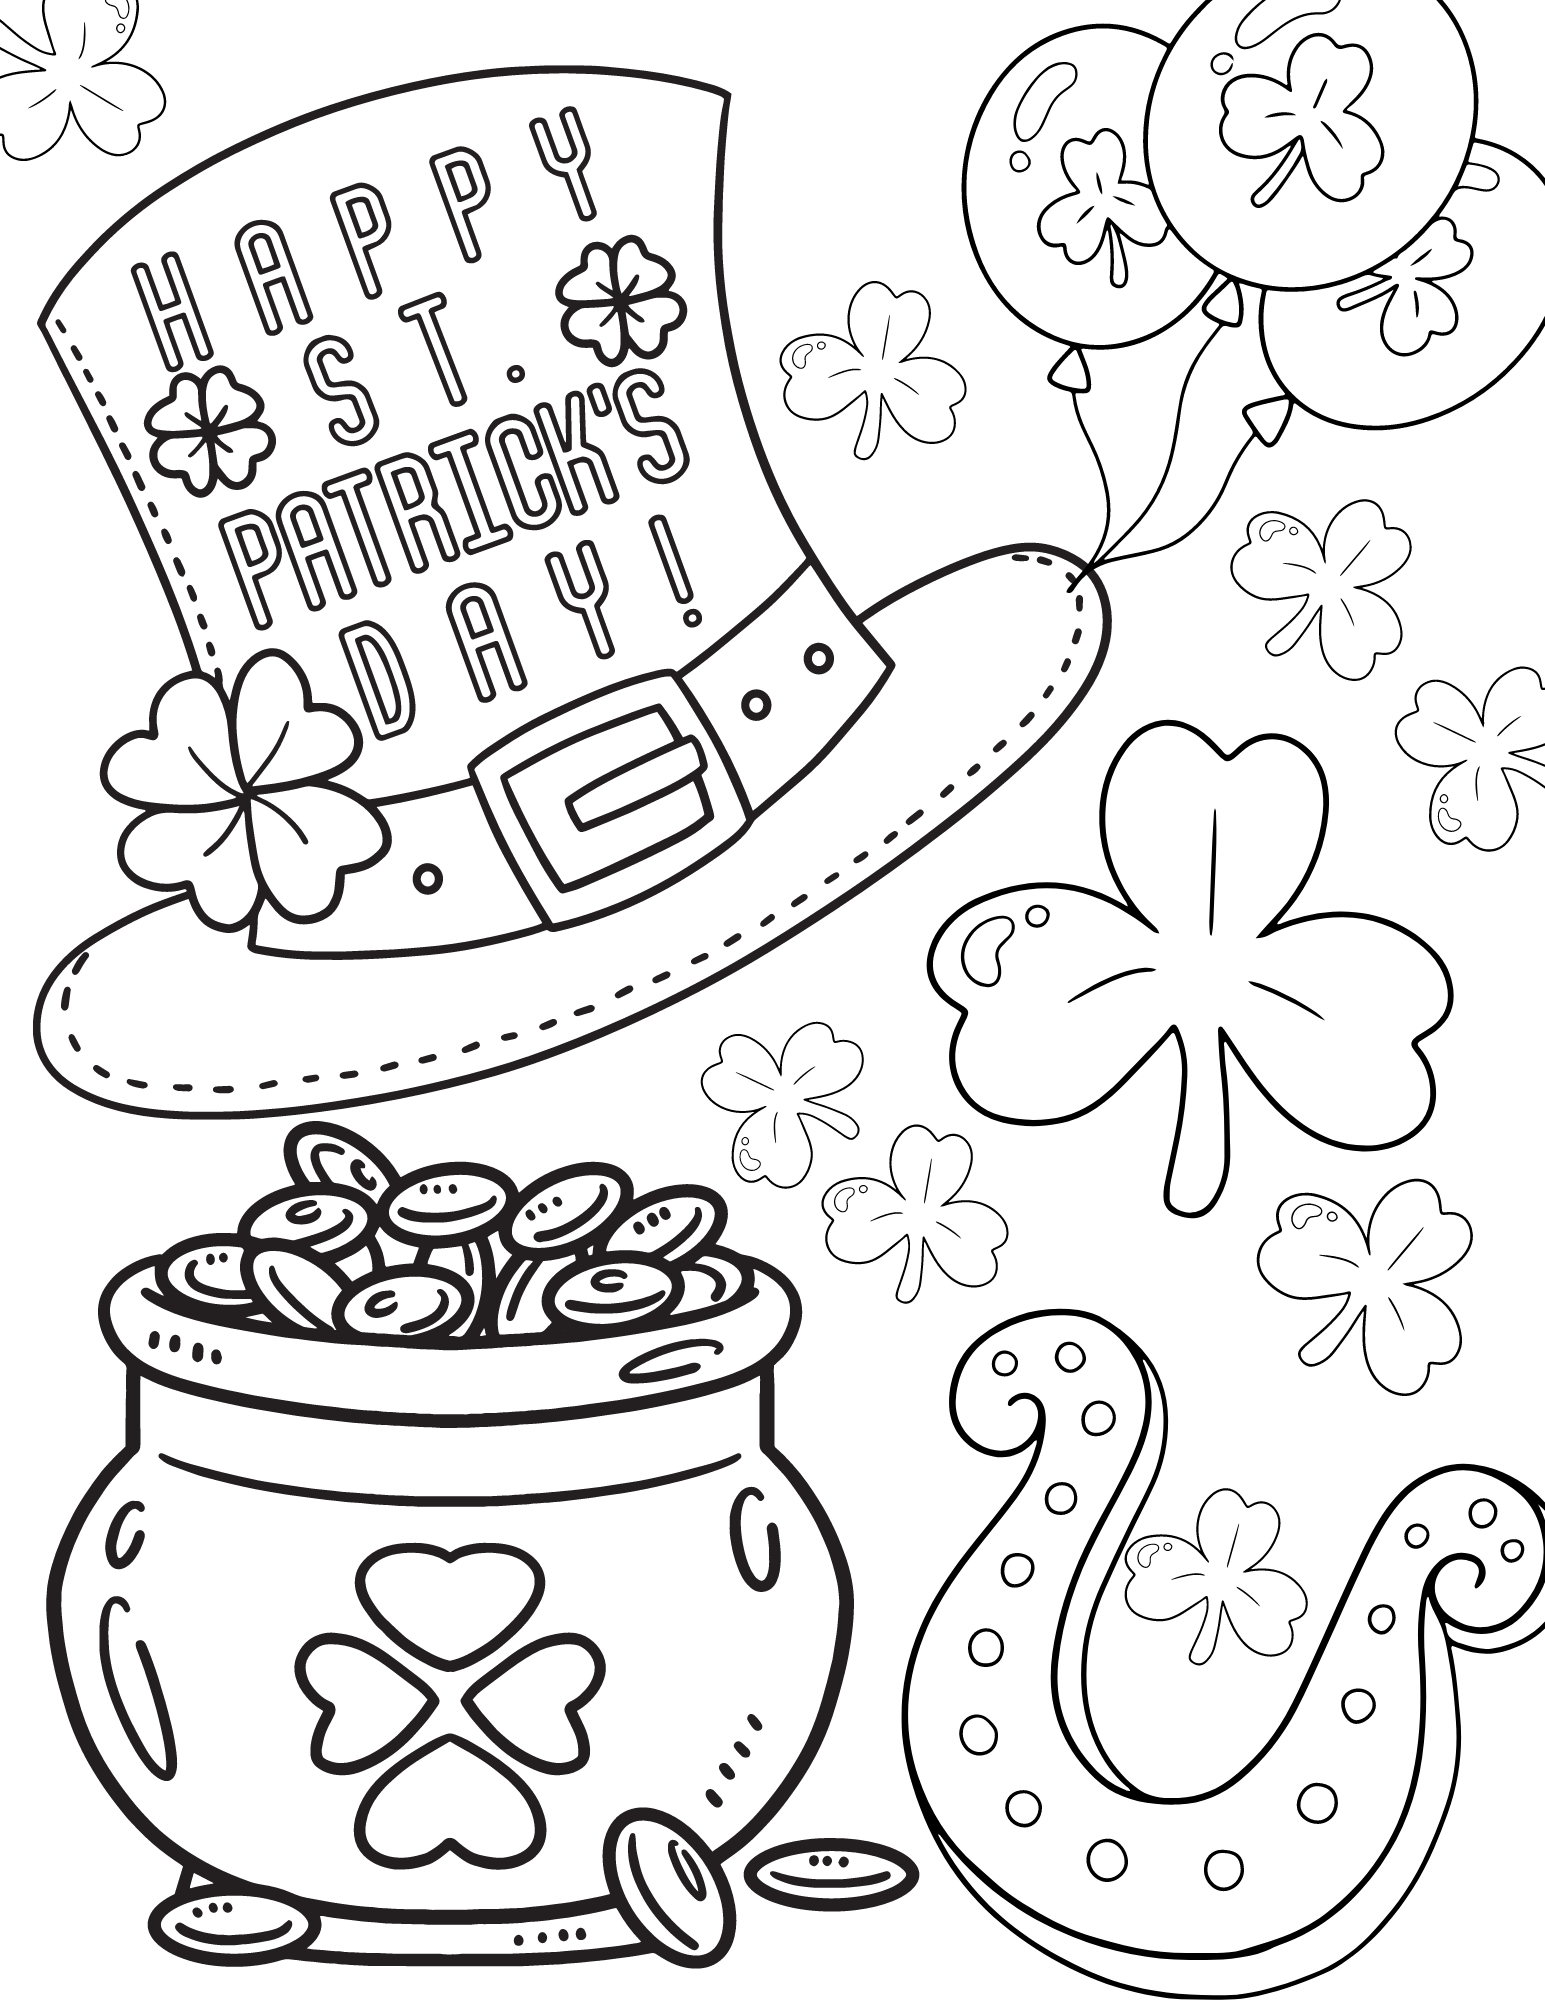 happy-st-patrick-s-day-coloring-page-free-printable-coloring-pages